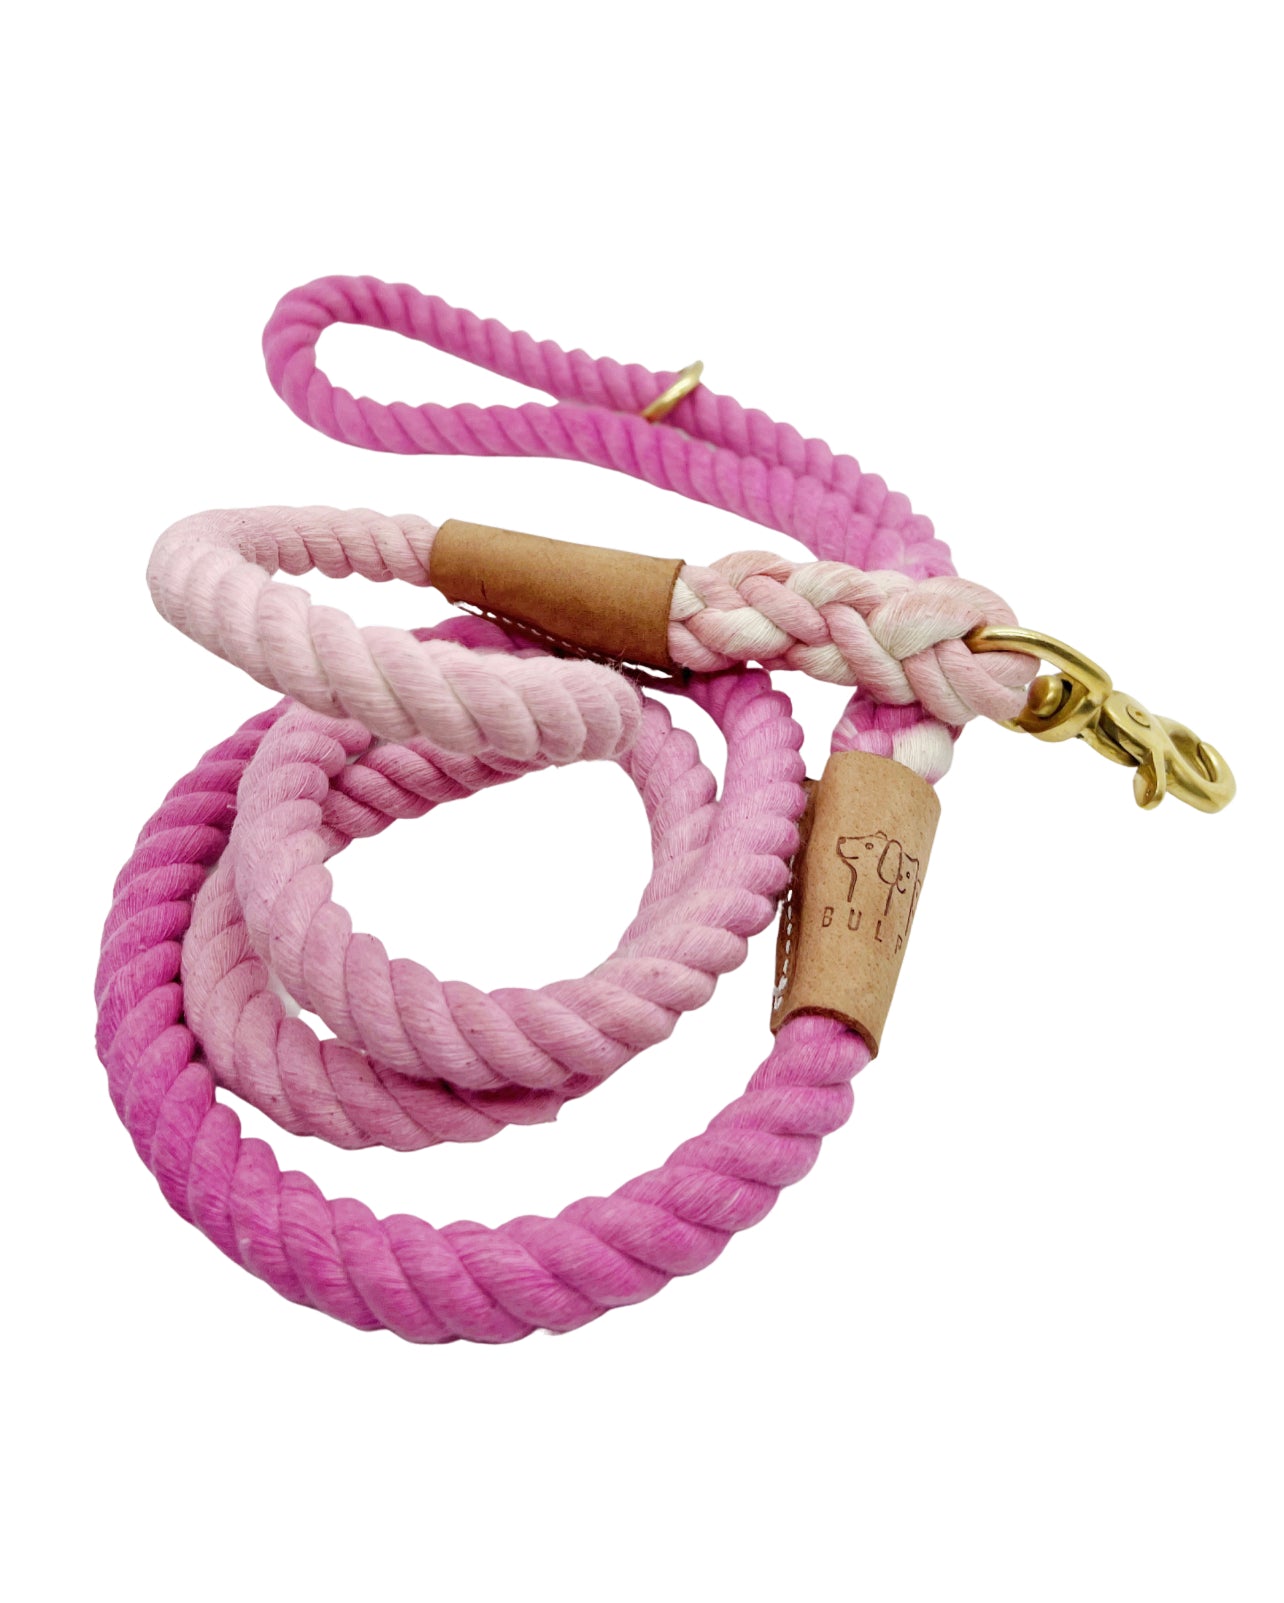 BULPET Eco Friendly Natural Cotton Handmade Dog Ombre Pink Rope Leash with Brown Leather and Gold Brass Hardware/ 5 Ft/ All Dogs